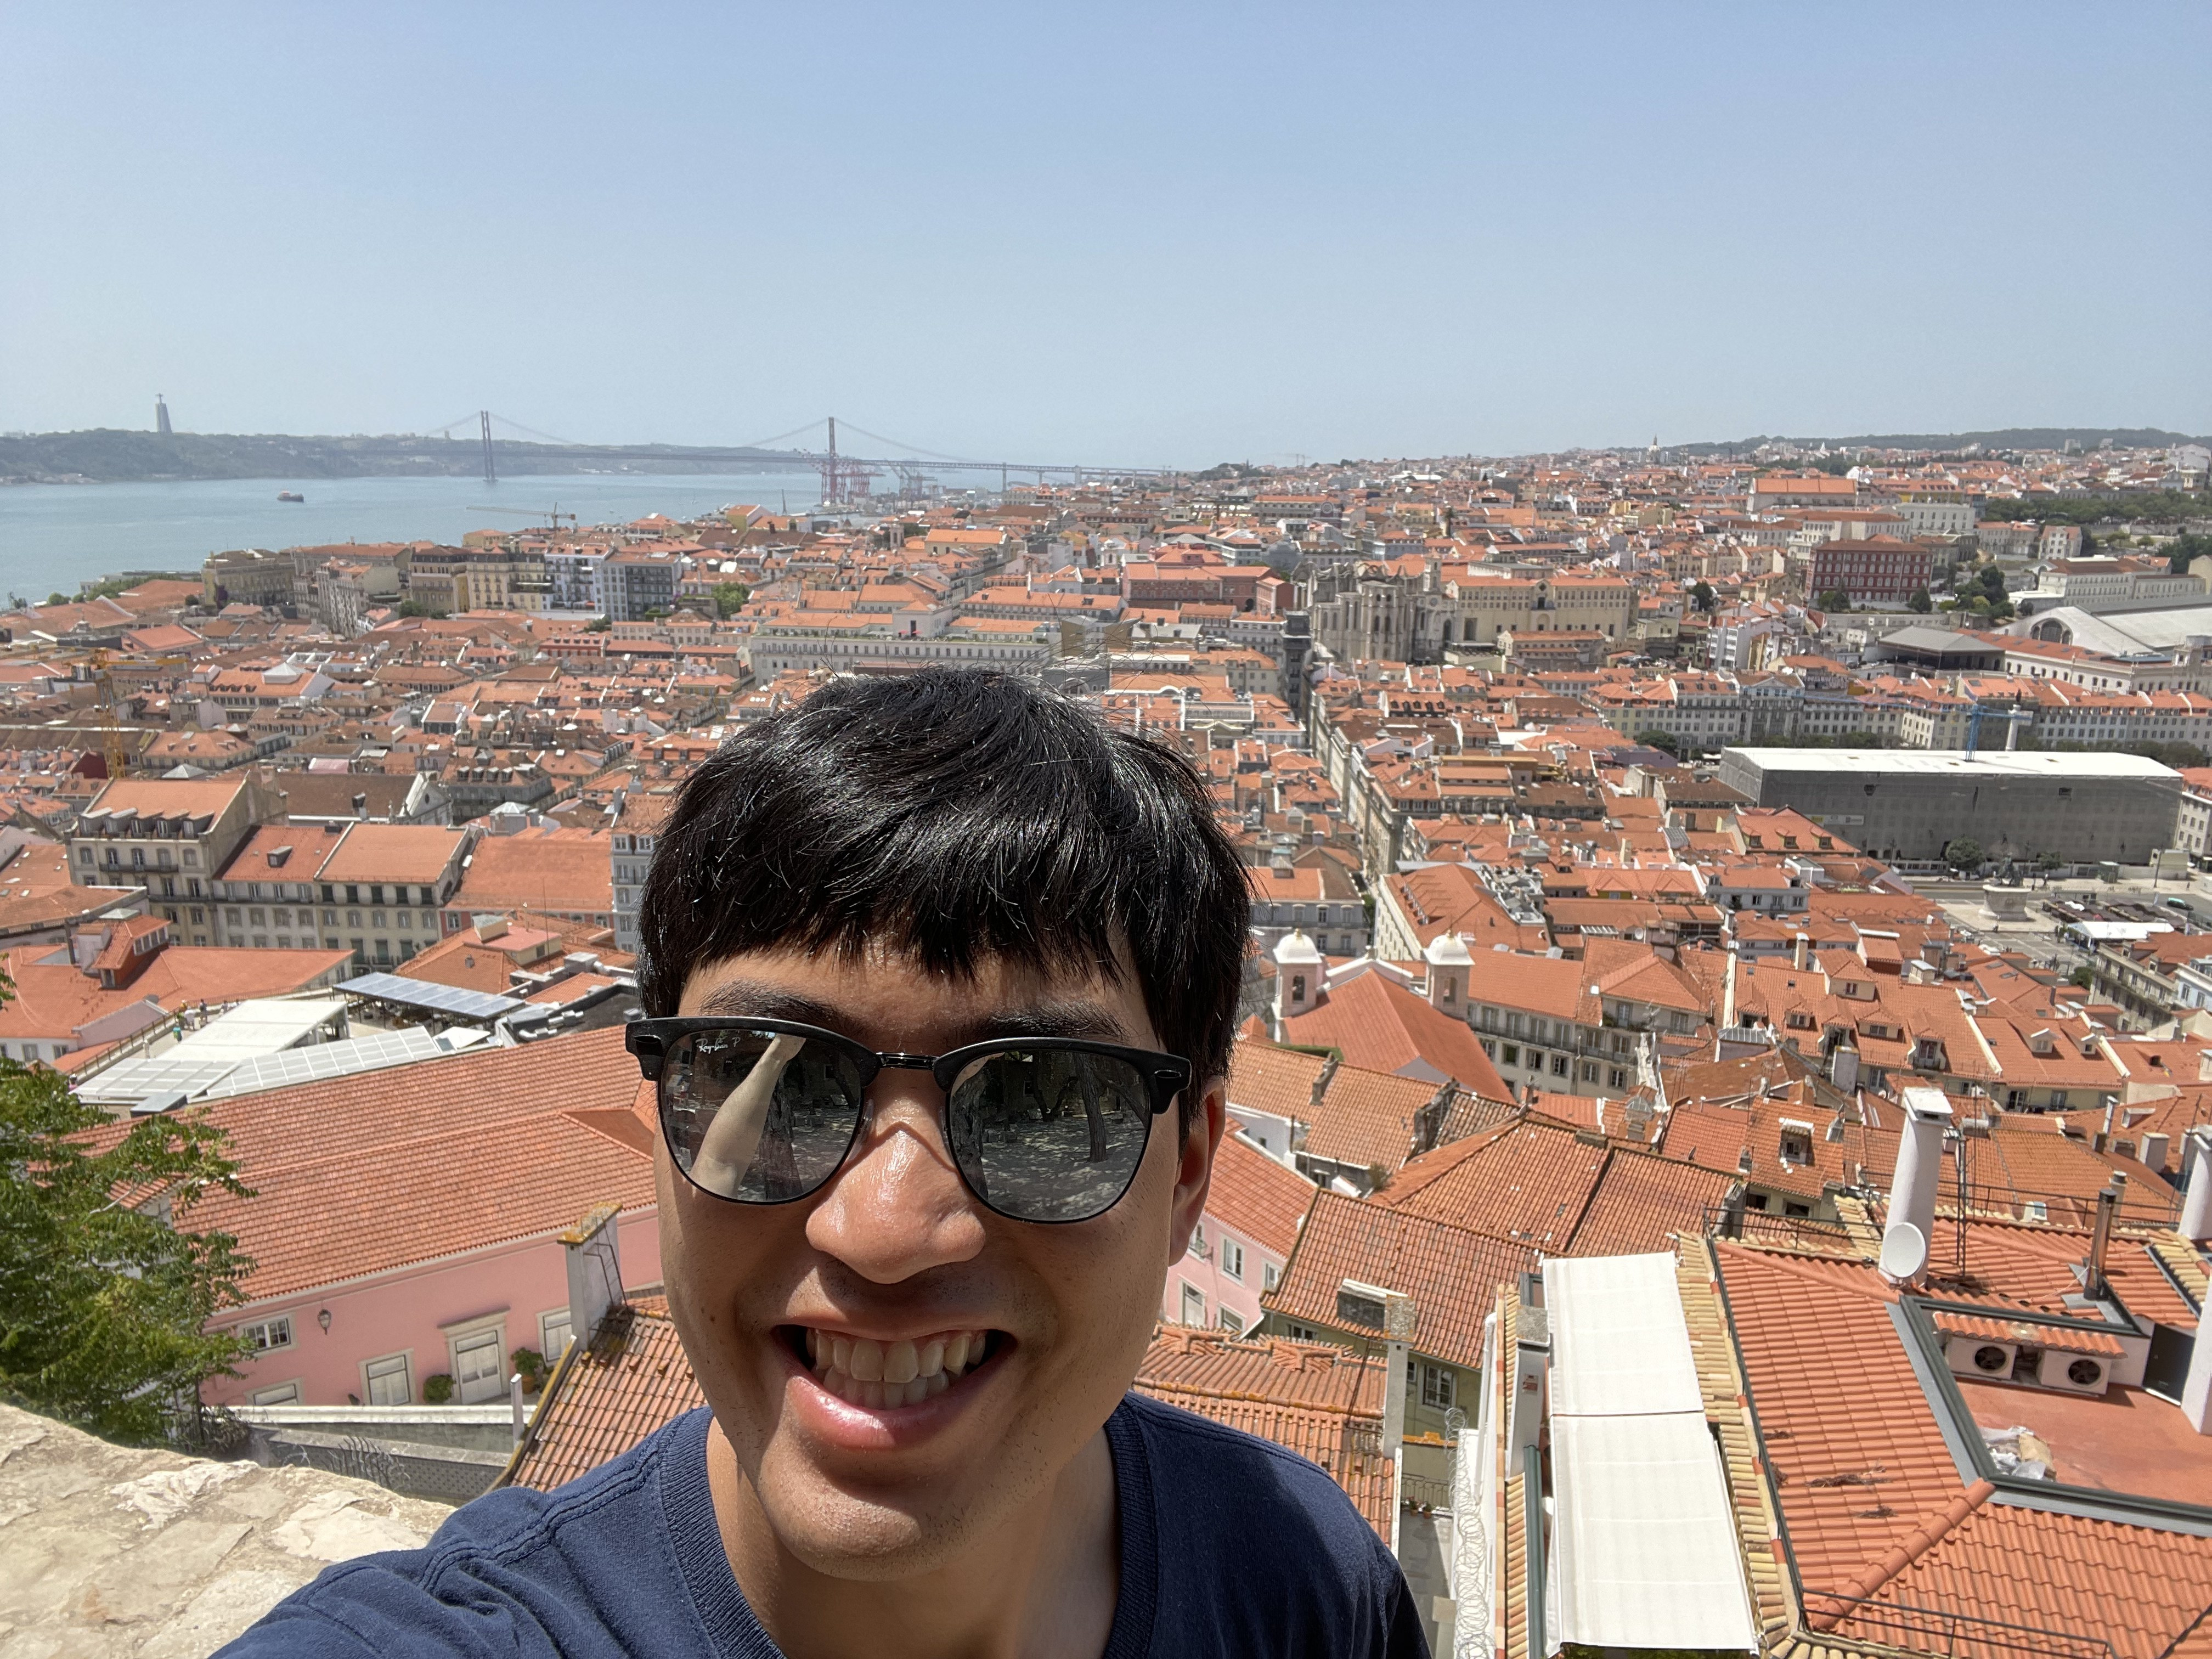 The views of Lisbon from the castle heights